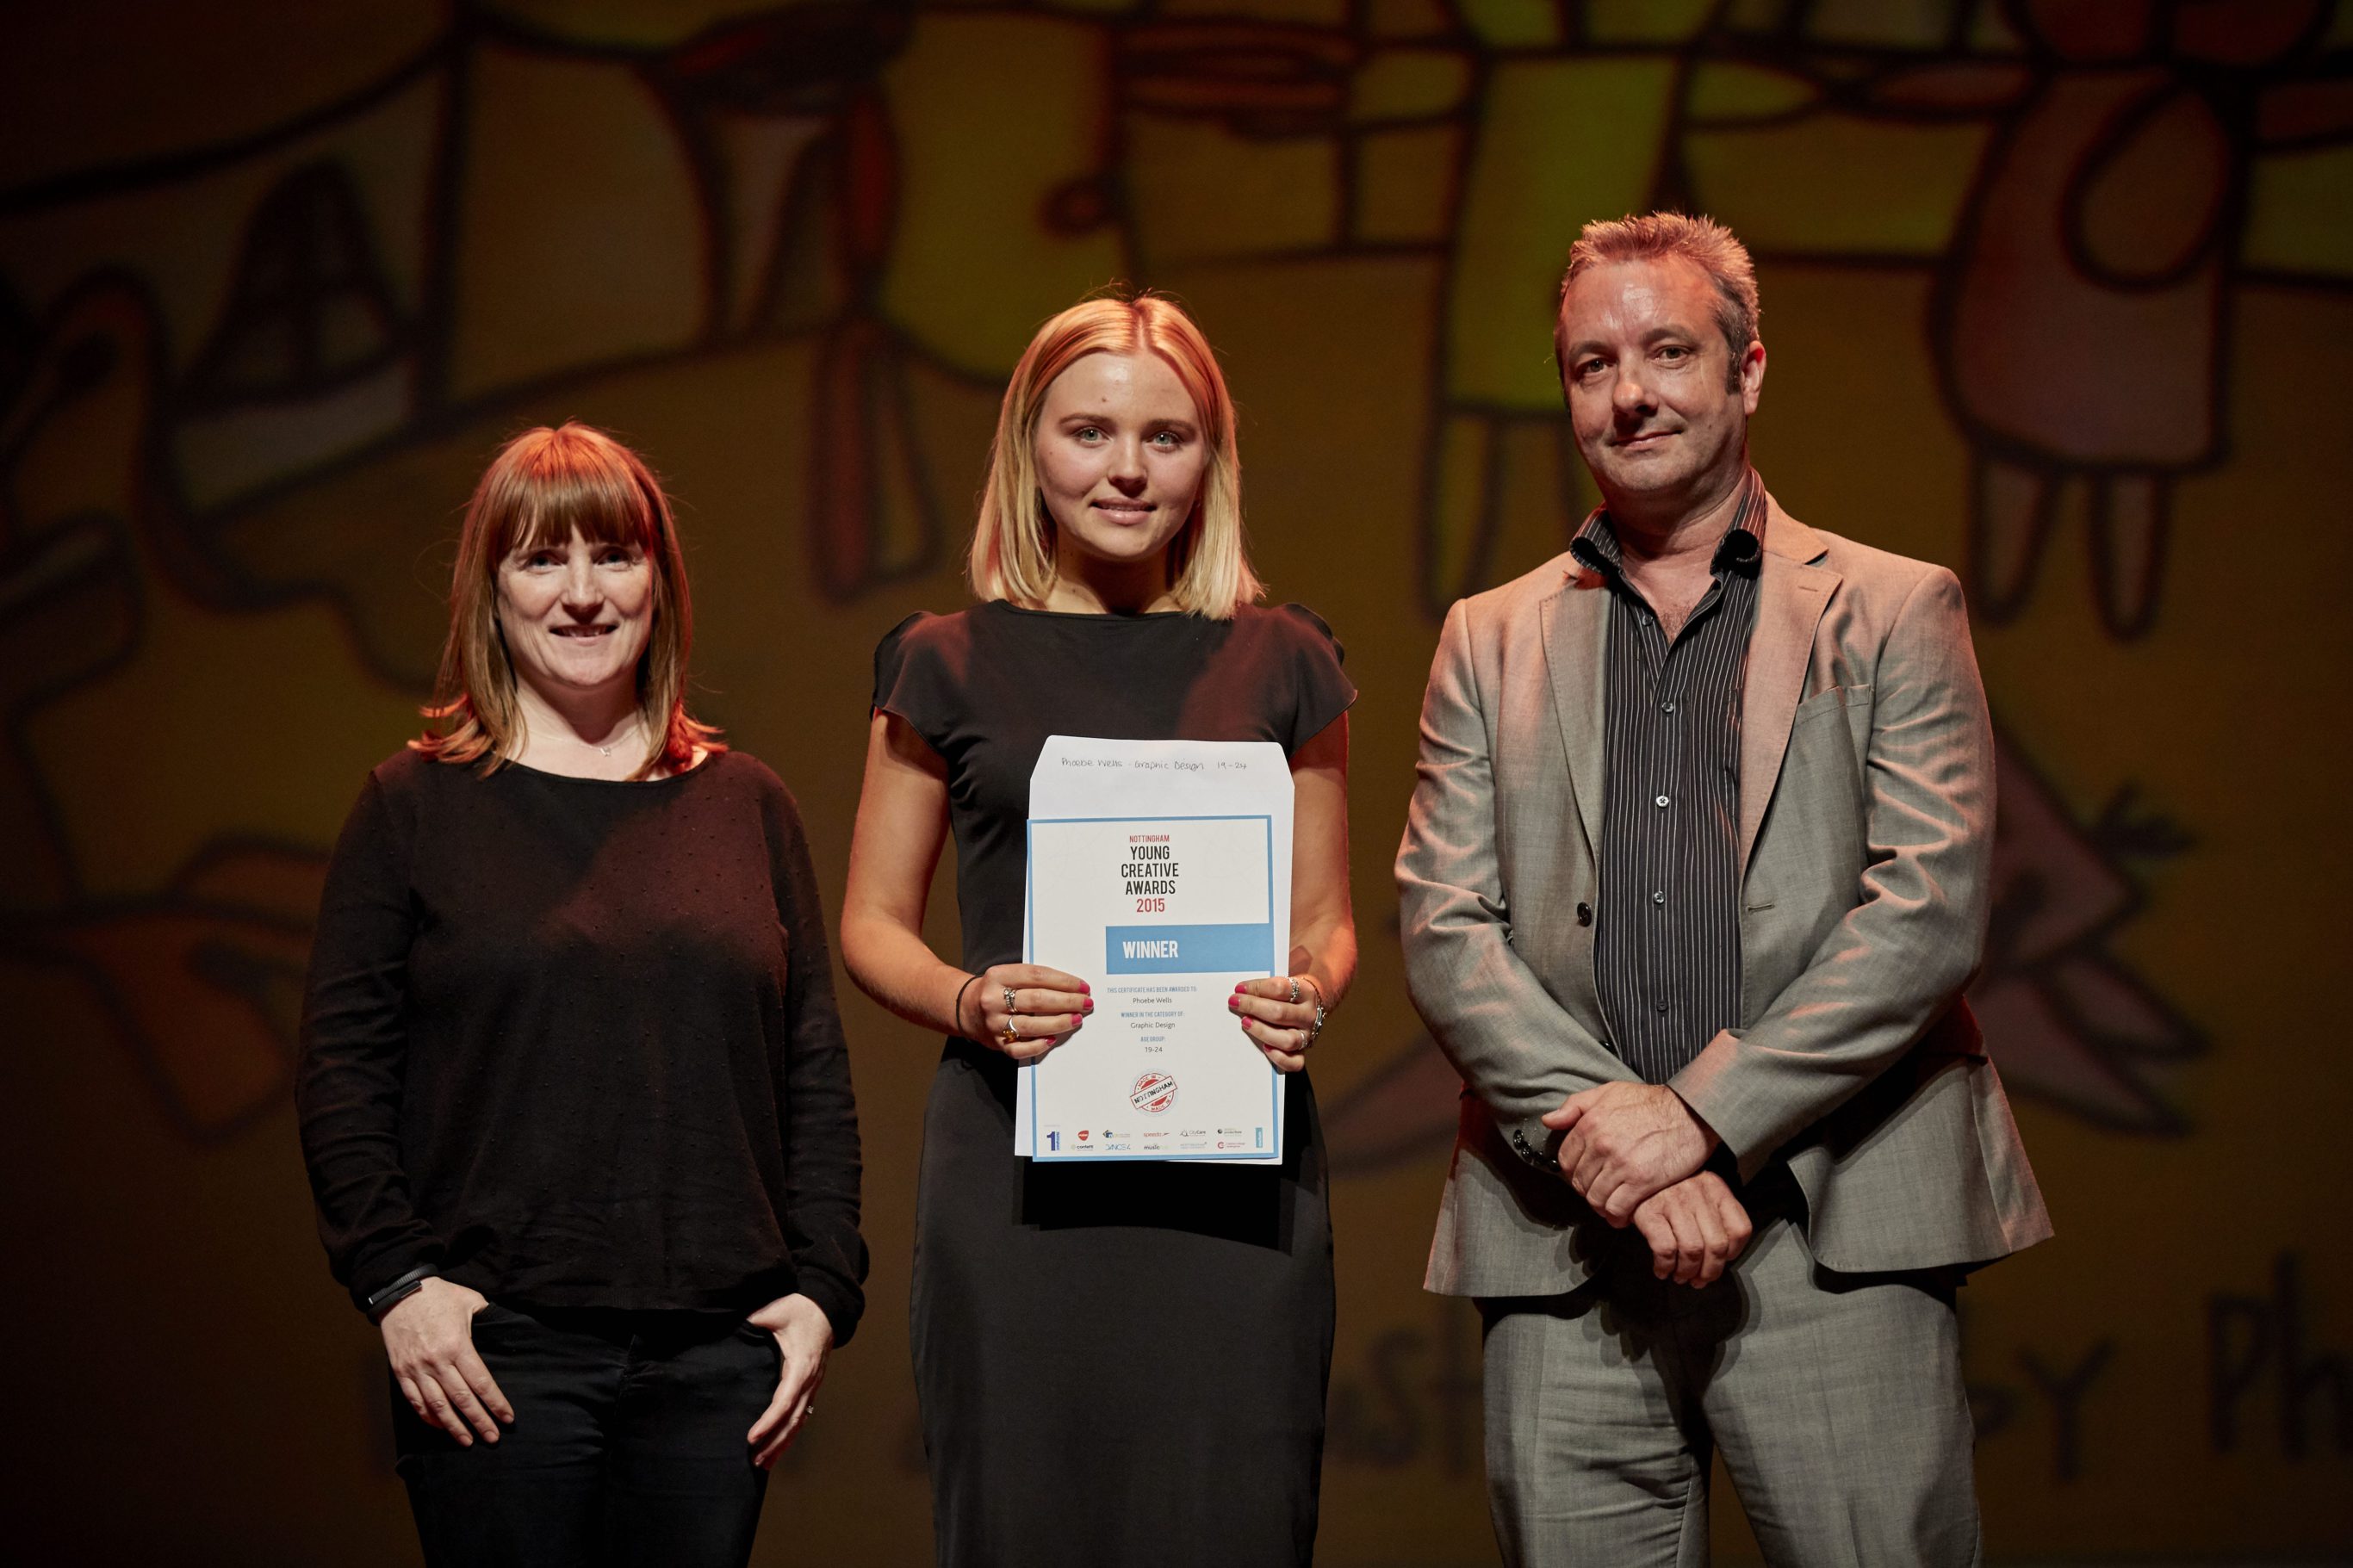 Nottingham Young Creative Awards 2015. Phoebe Wells being presented with winners certificate for Graphic Design category.